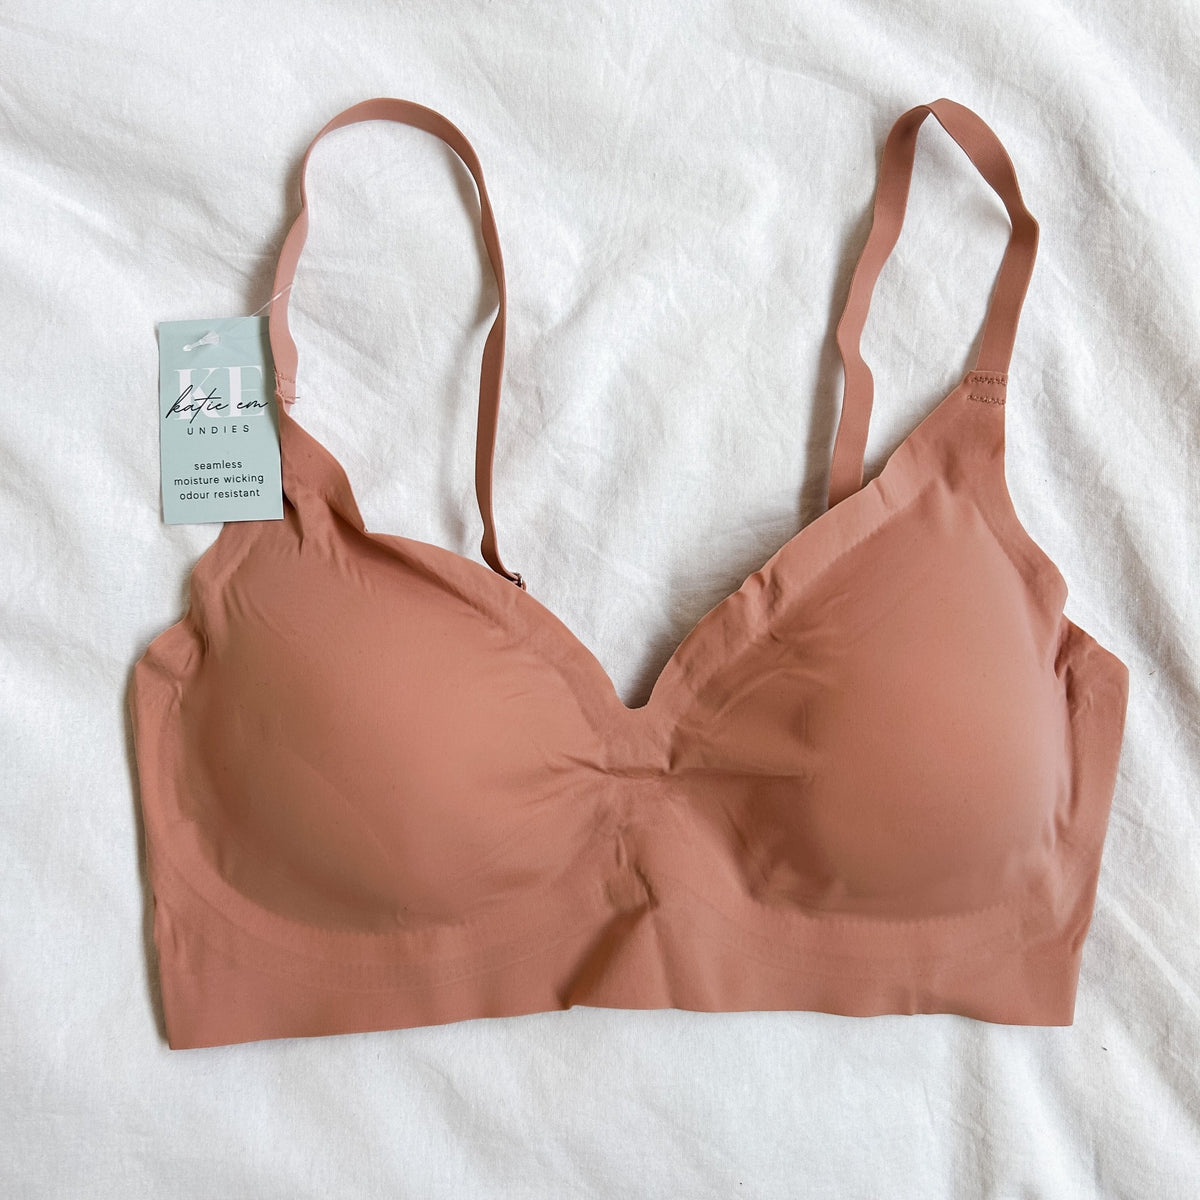 Adjustable Wireless Seamless Bra 2 for $75 - Size Small